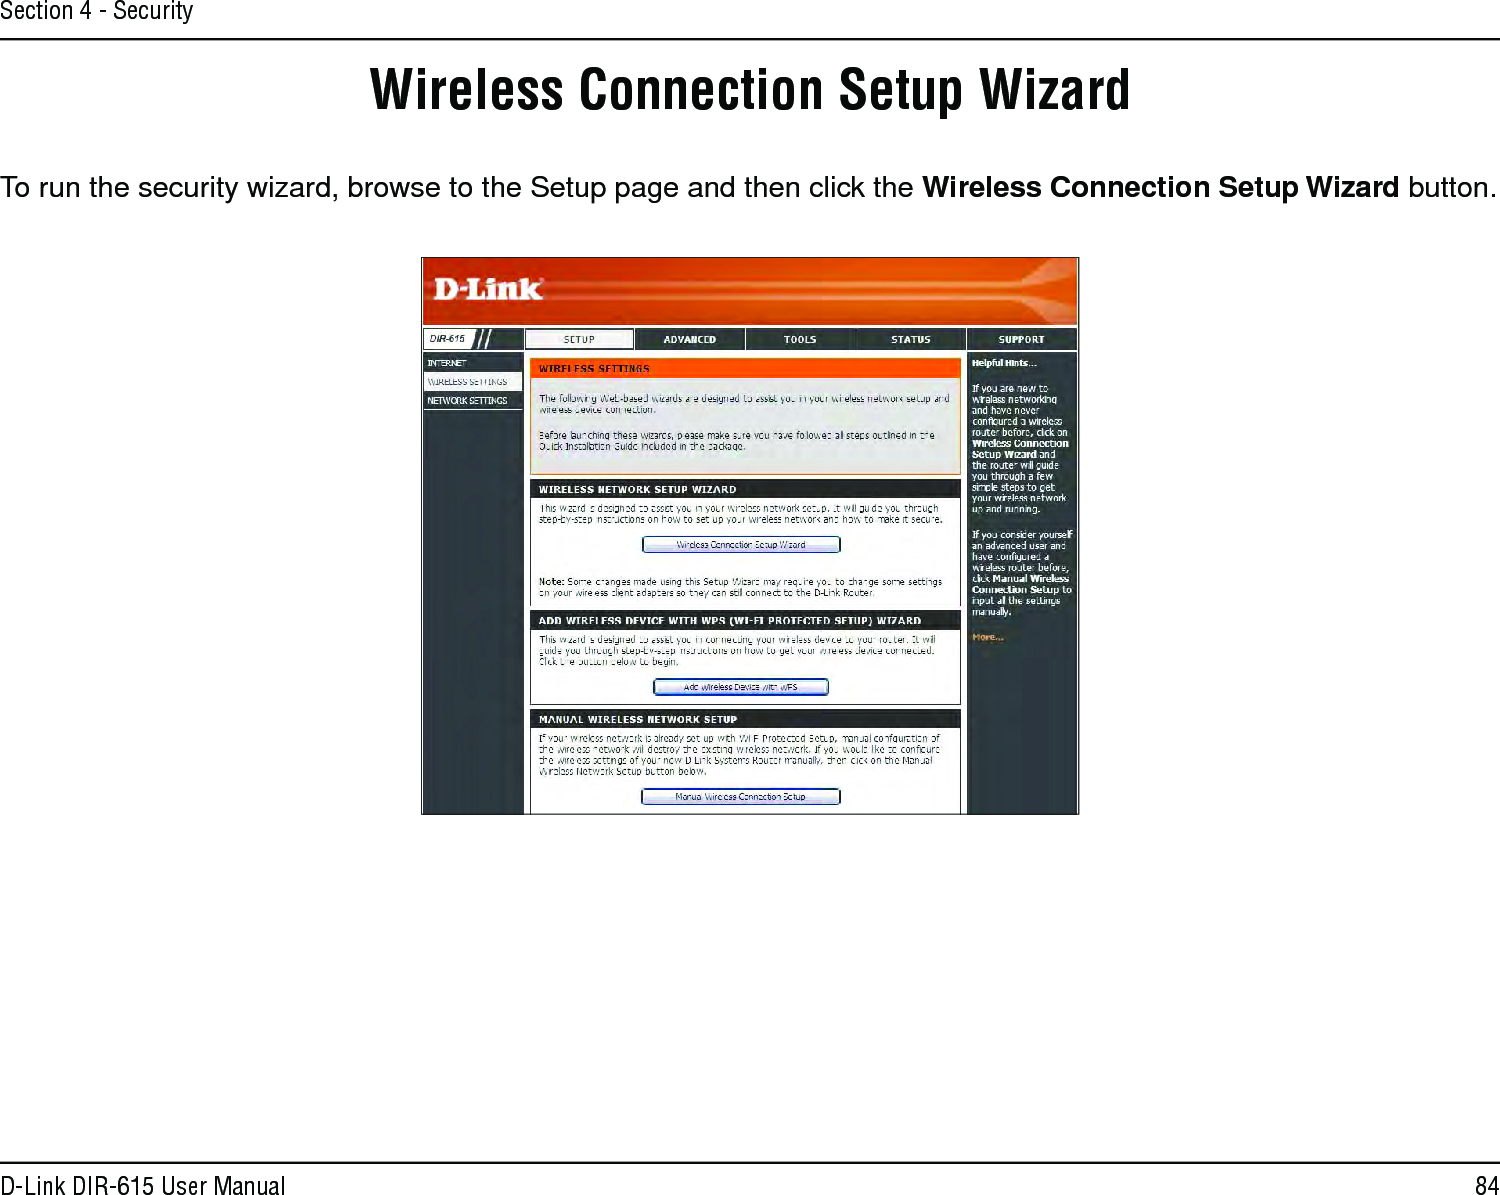 84D-Link DIR-615 User ManualSection 4 - SecurityWireless Connection Setup WizardTo run the security wizard, browse to the Setup page and then click the Wireless Connection Setup Wizard button. 